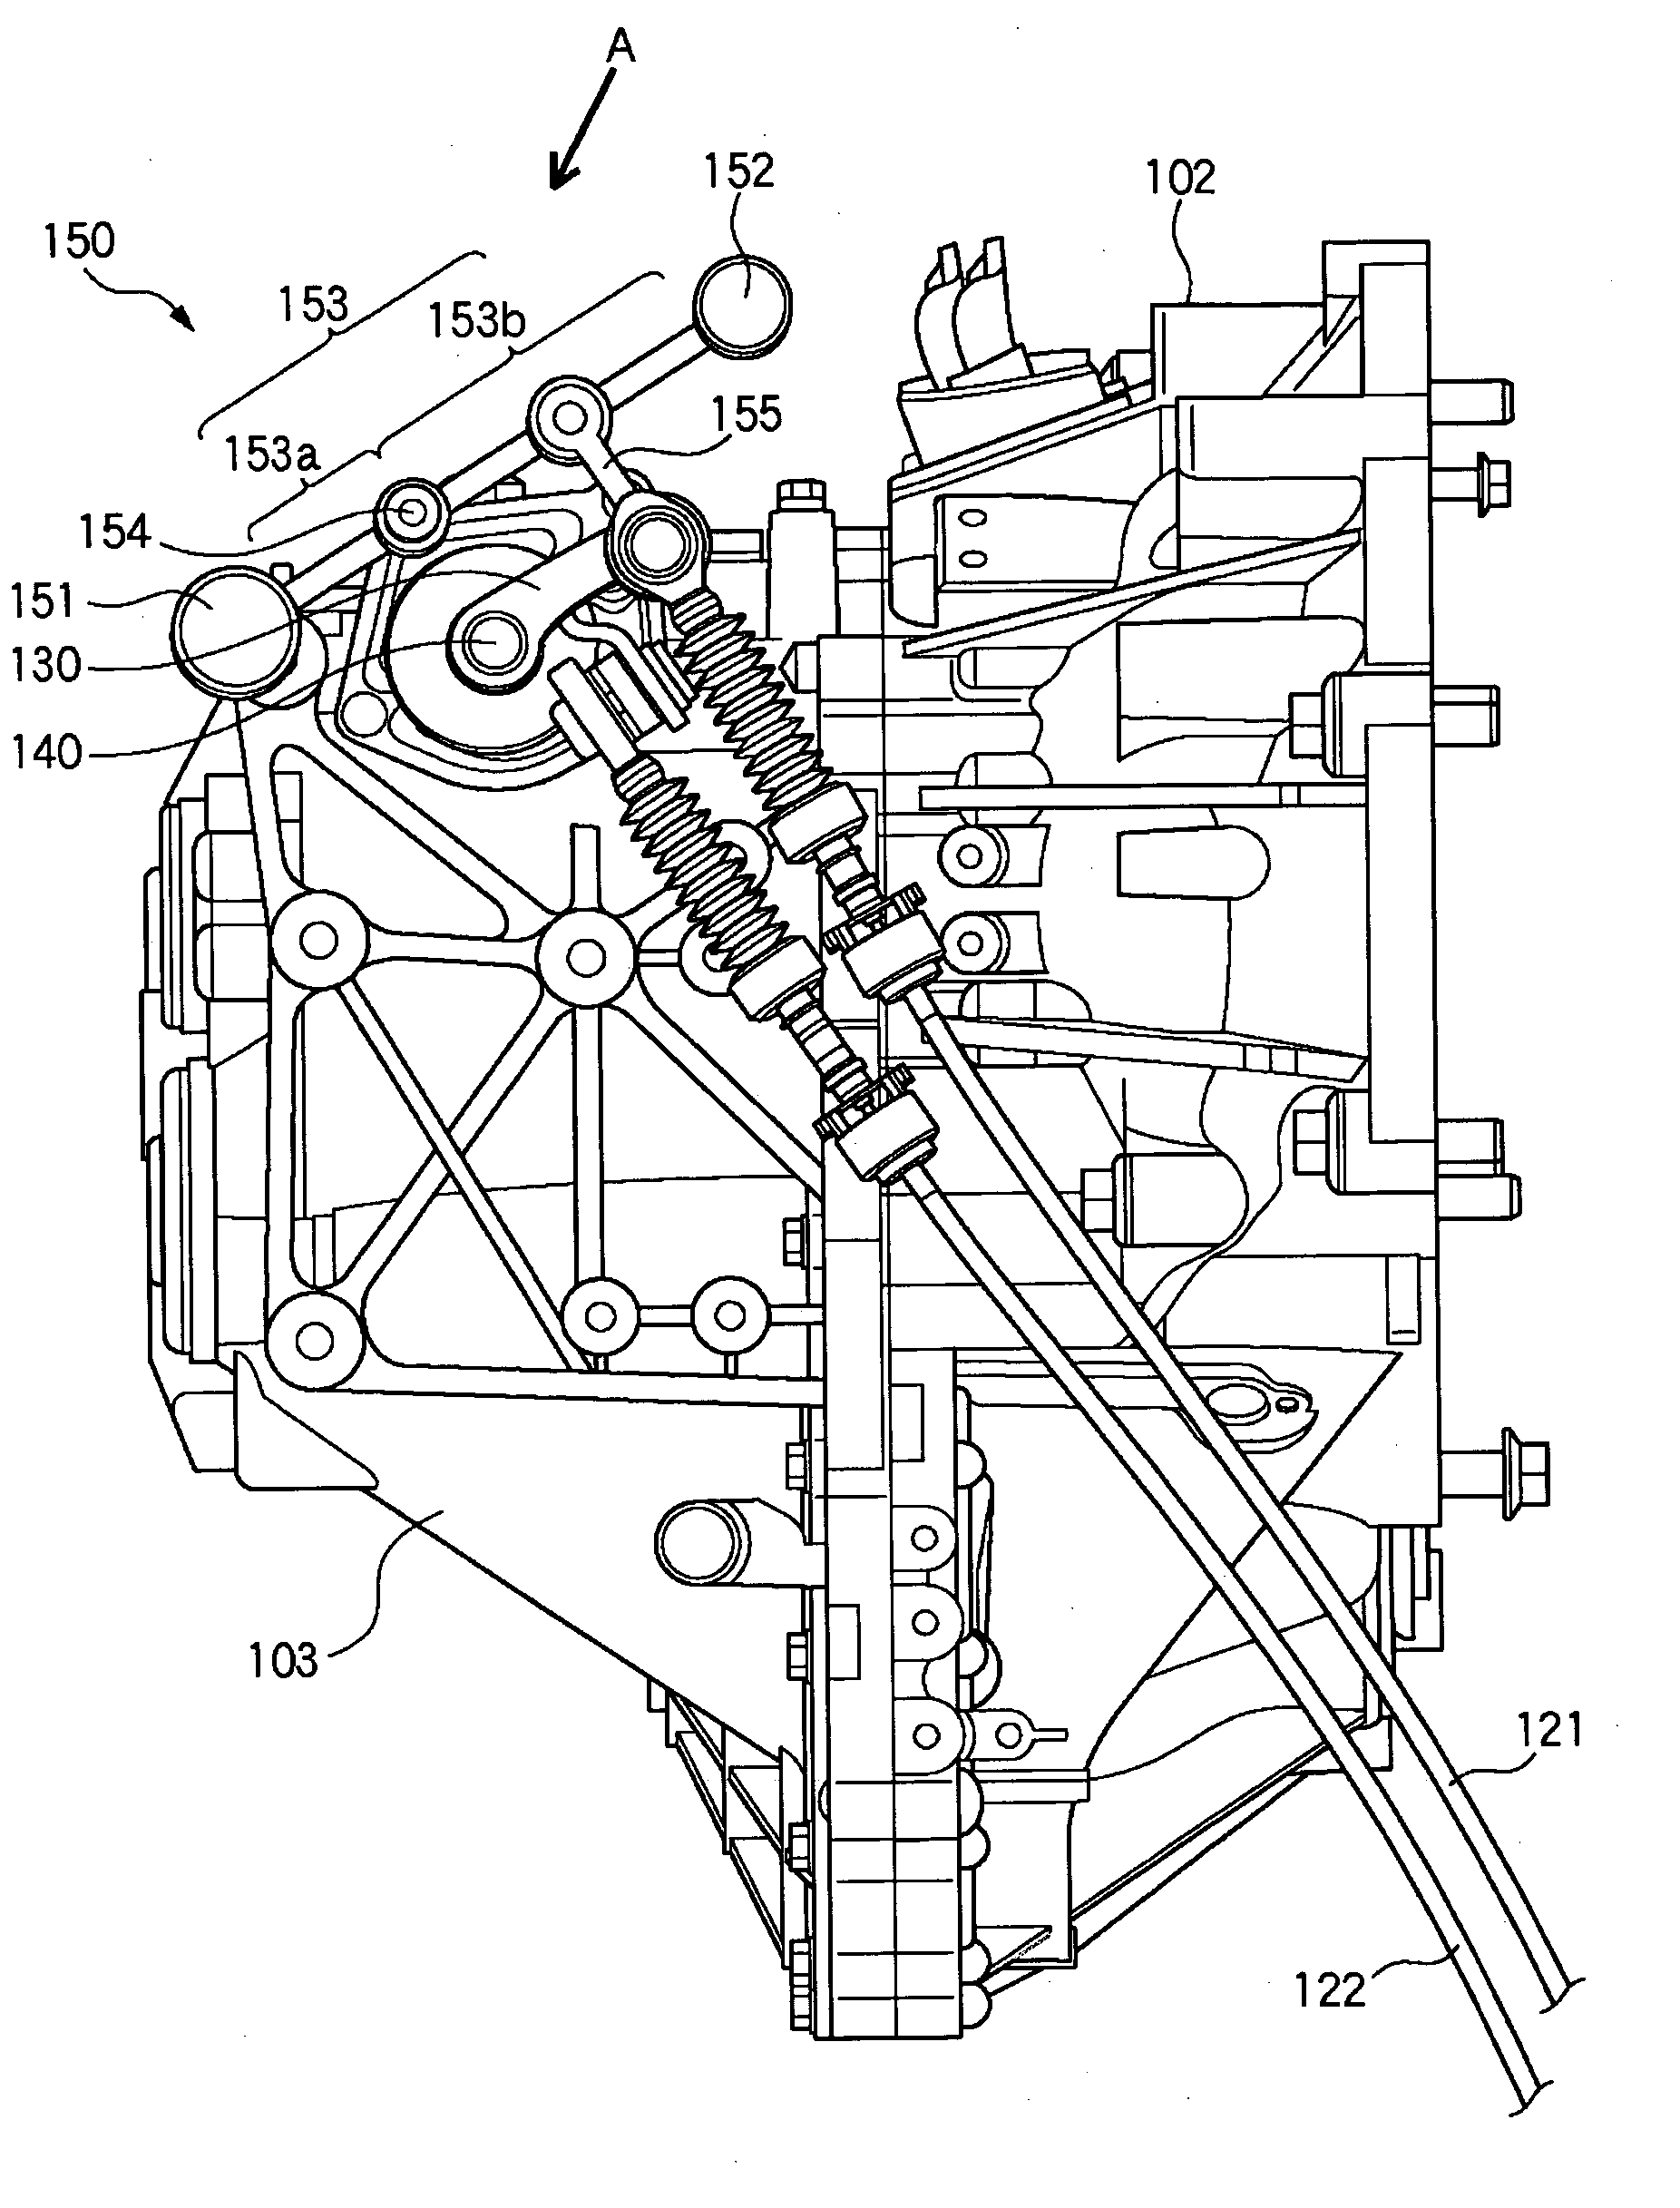 Transmission equipped with cable-type shift device